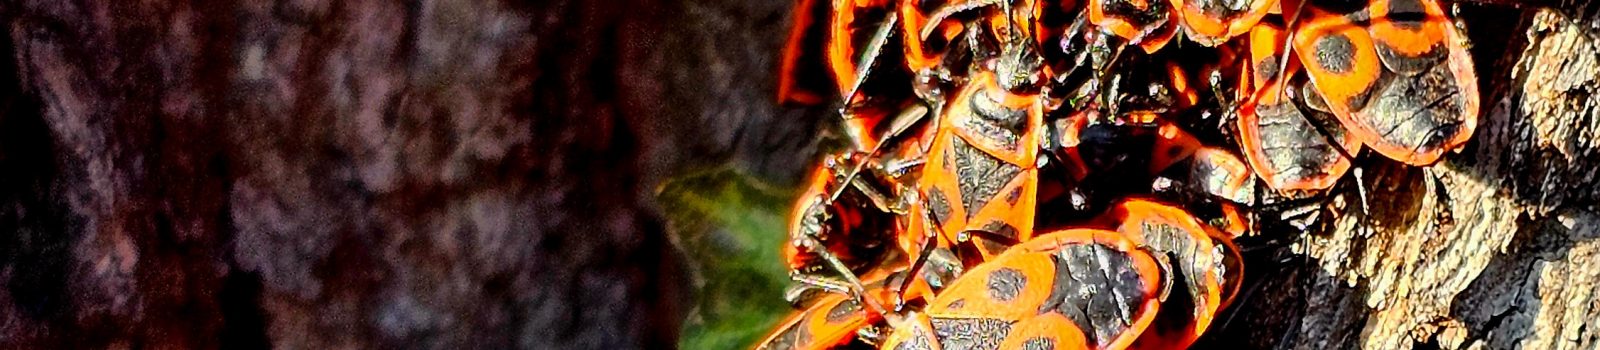 Many fire beetles sun themselves on the tree trunk